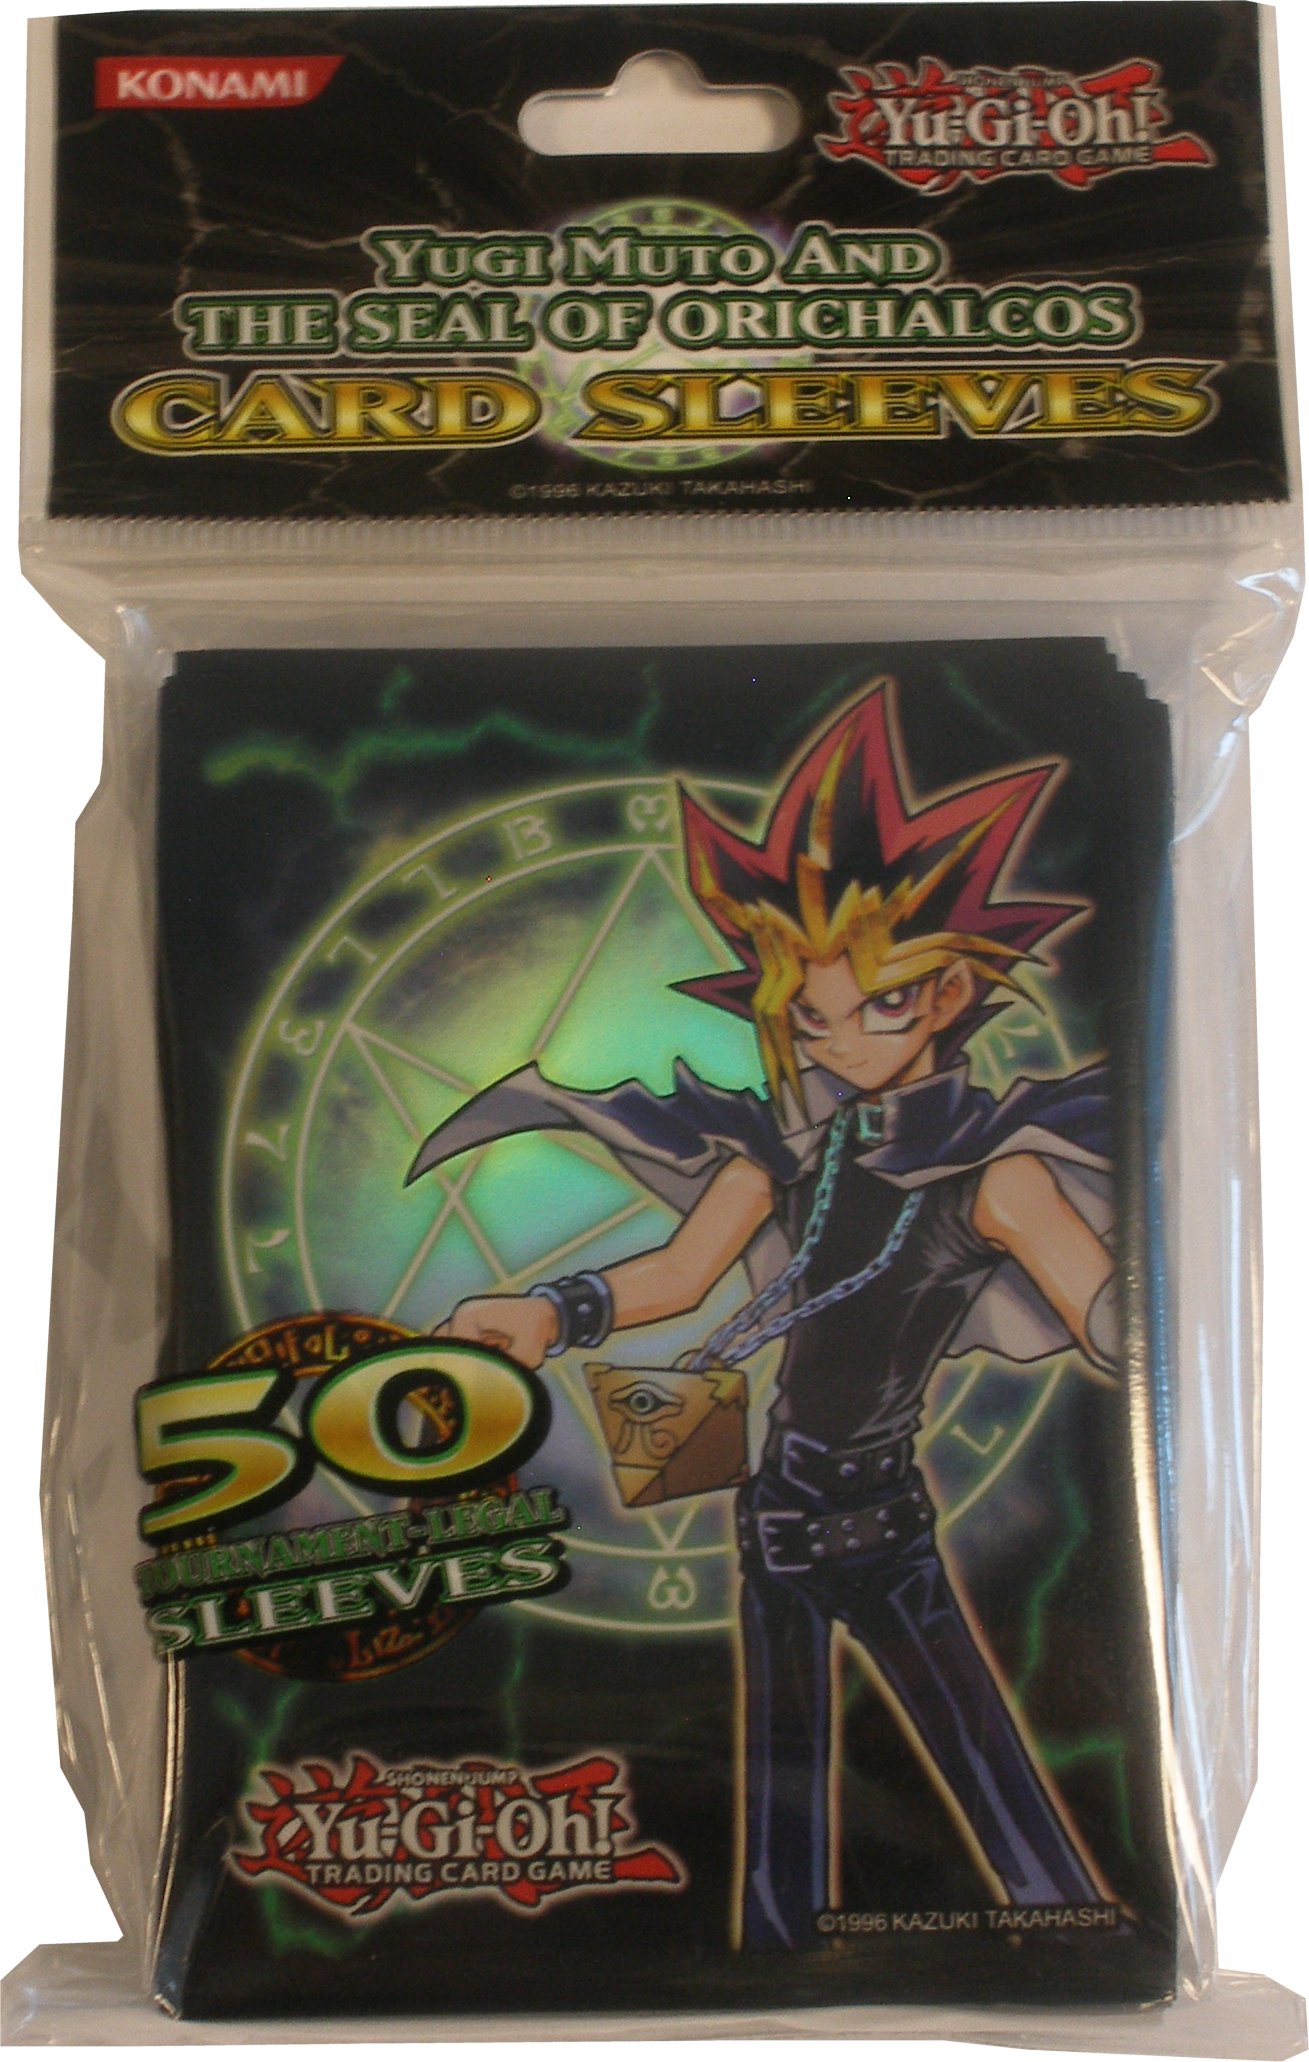 50x Yu-Gi-Oh Yugi Muto and the SEAL of ORICHALCOS Card Sleeves/cards Envelopes 